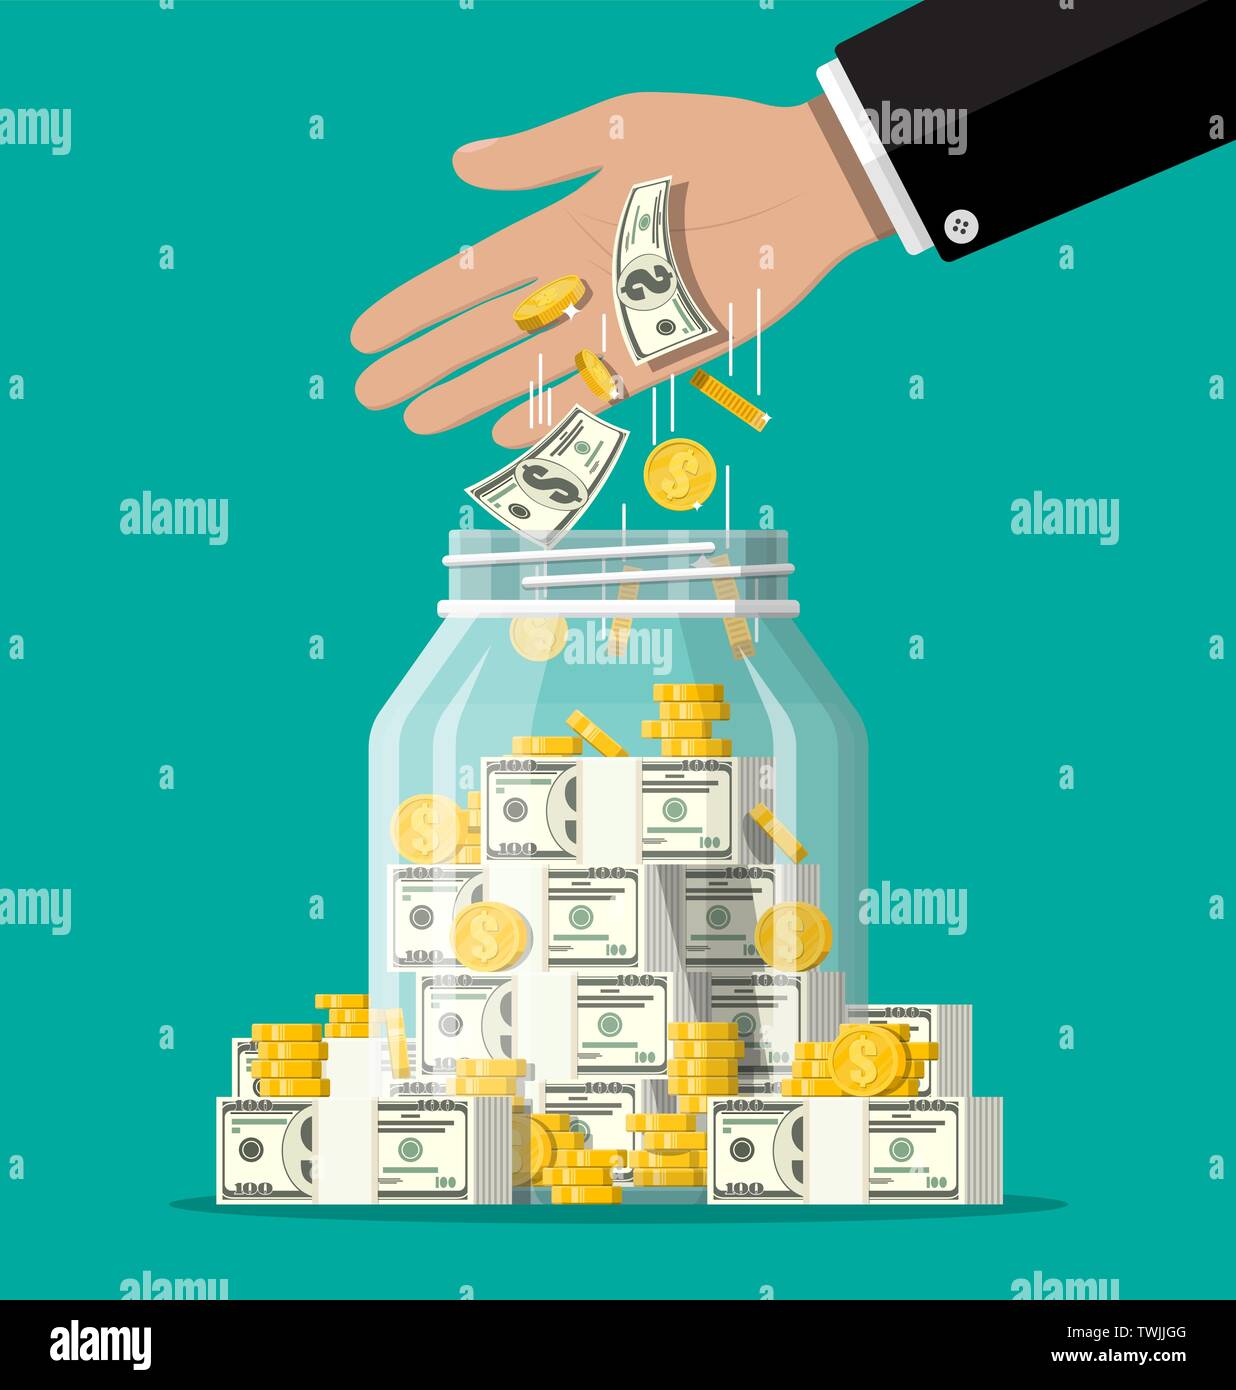 Glass money jar full of gold coins and banknotes. Stock Vector